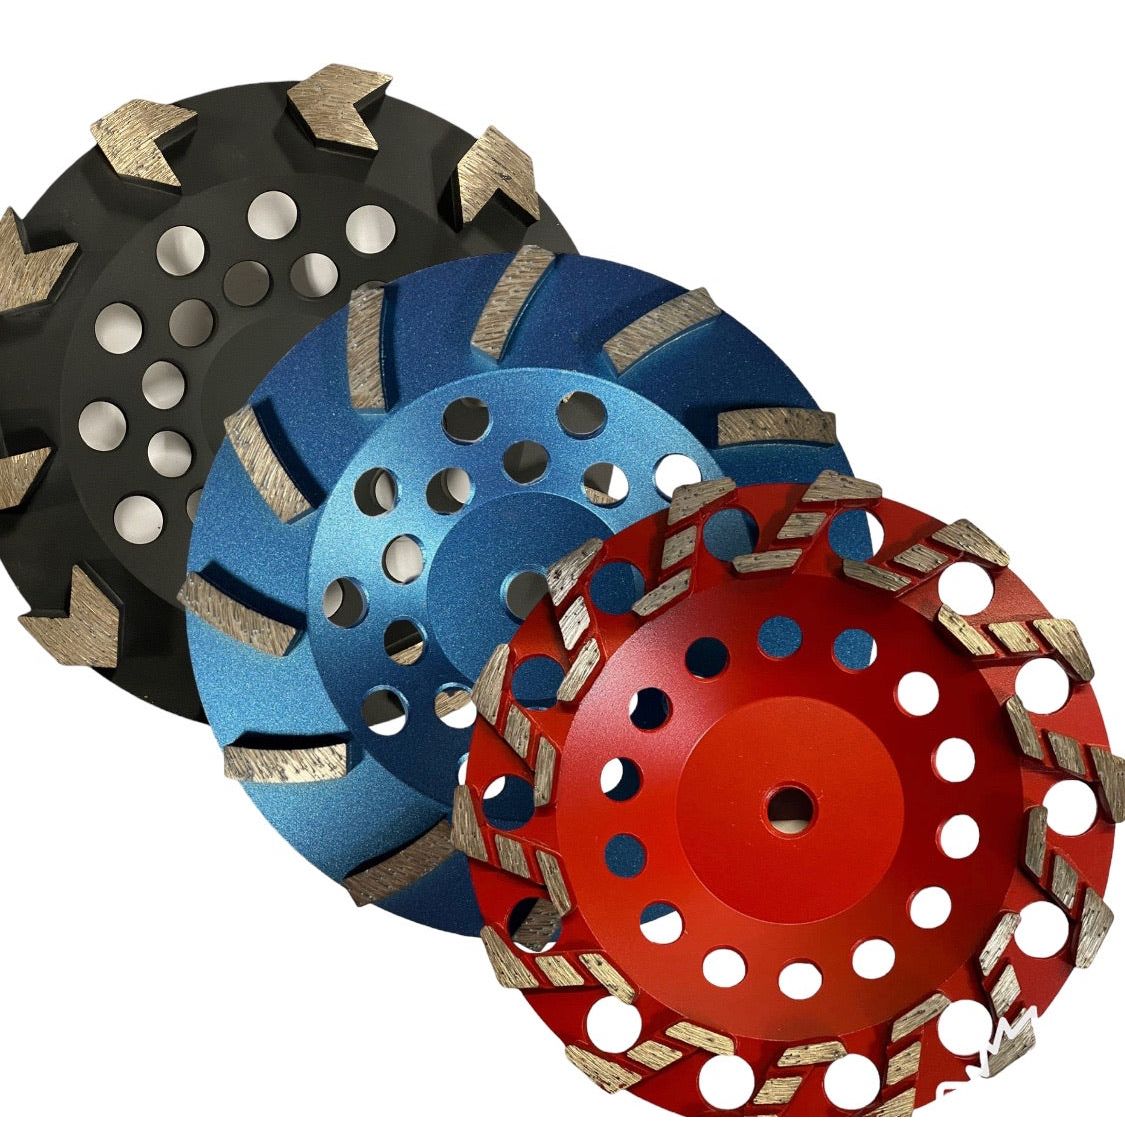 7" Aggressive Grinding Wheel #18/20 Diamond 5/8"-11 Arbor for Concrete and Paint, Epoxy, Mastic, Coating Removal - 10 Pack